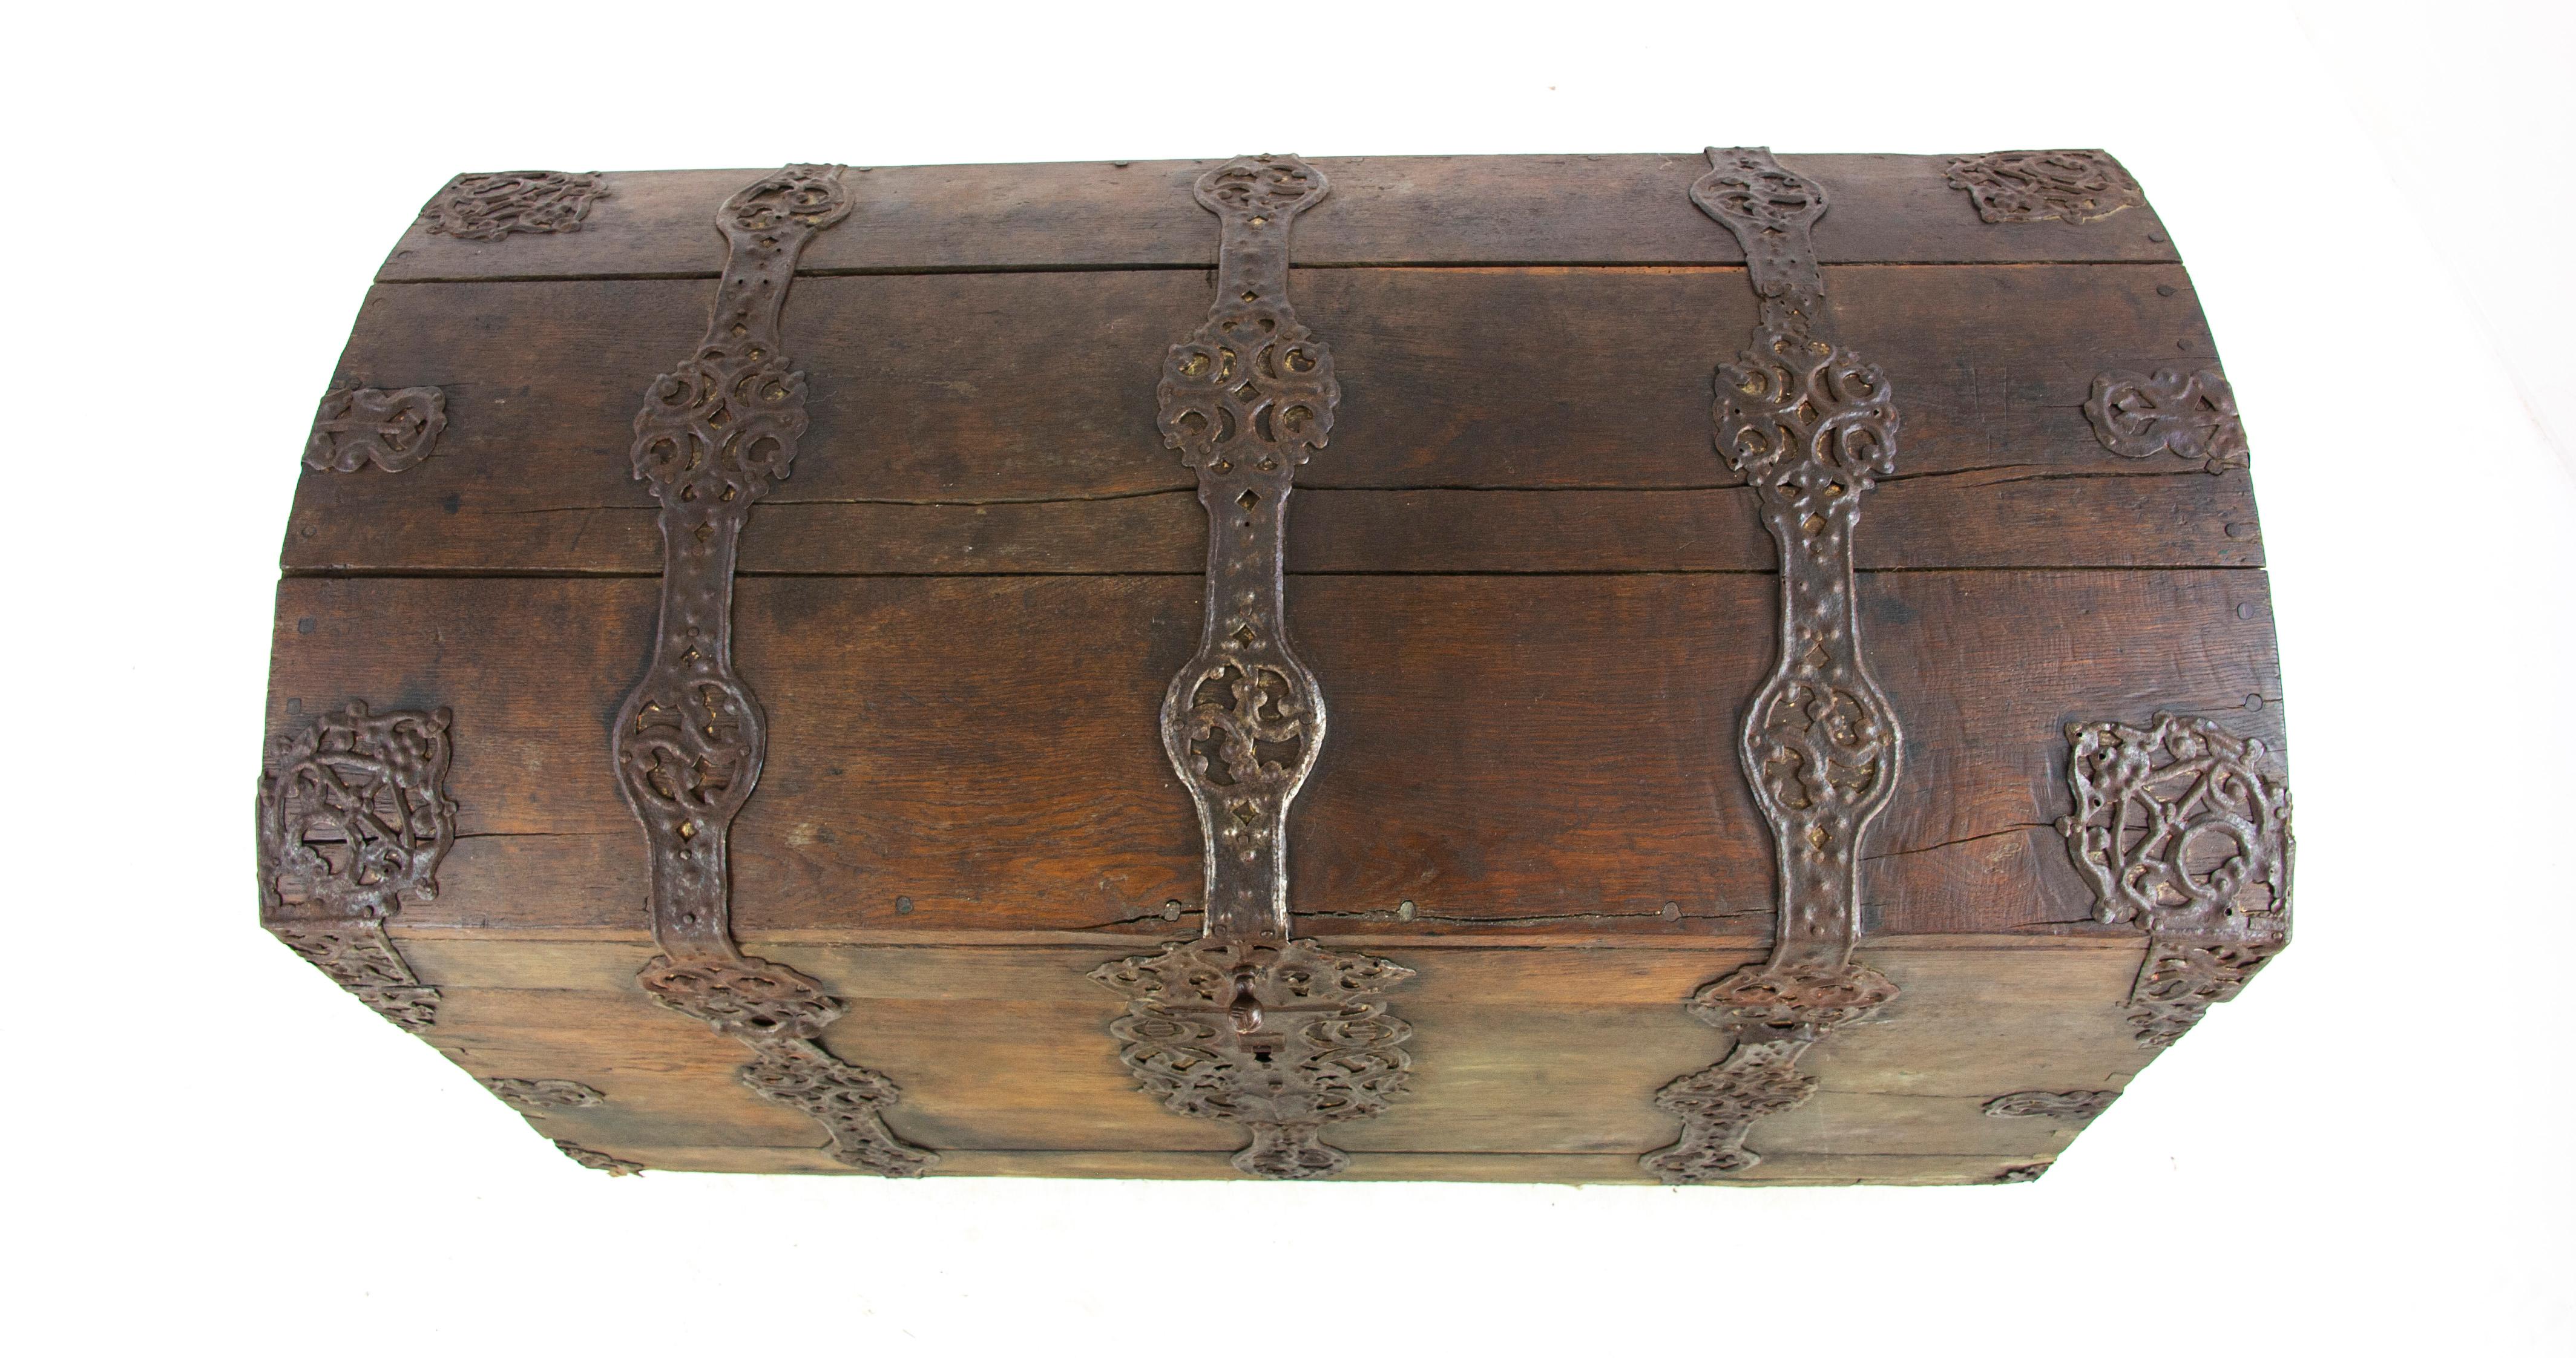 Hand-Crafted Antique Wooden Trunk, 18th Century Oak Dome Top Coffer, Germany 1780, B1500